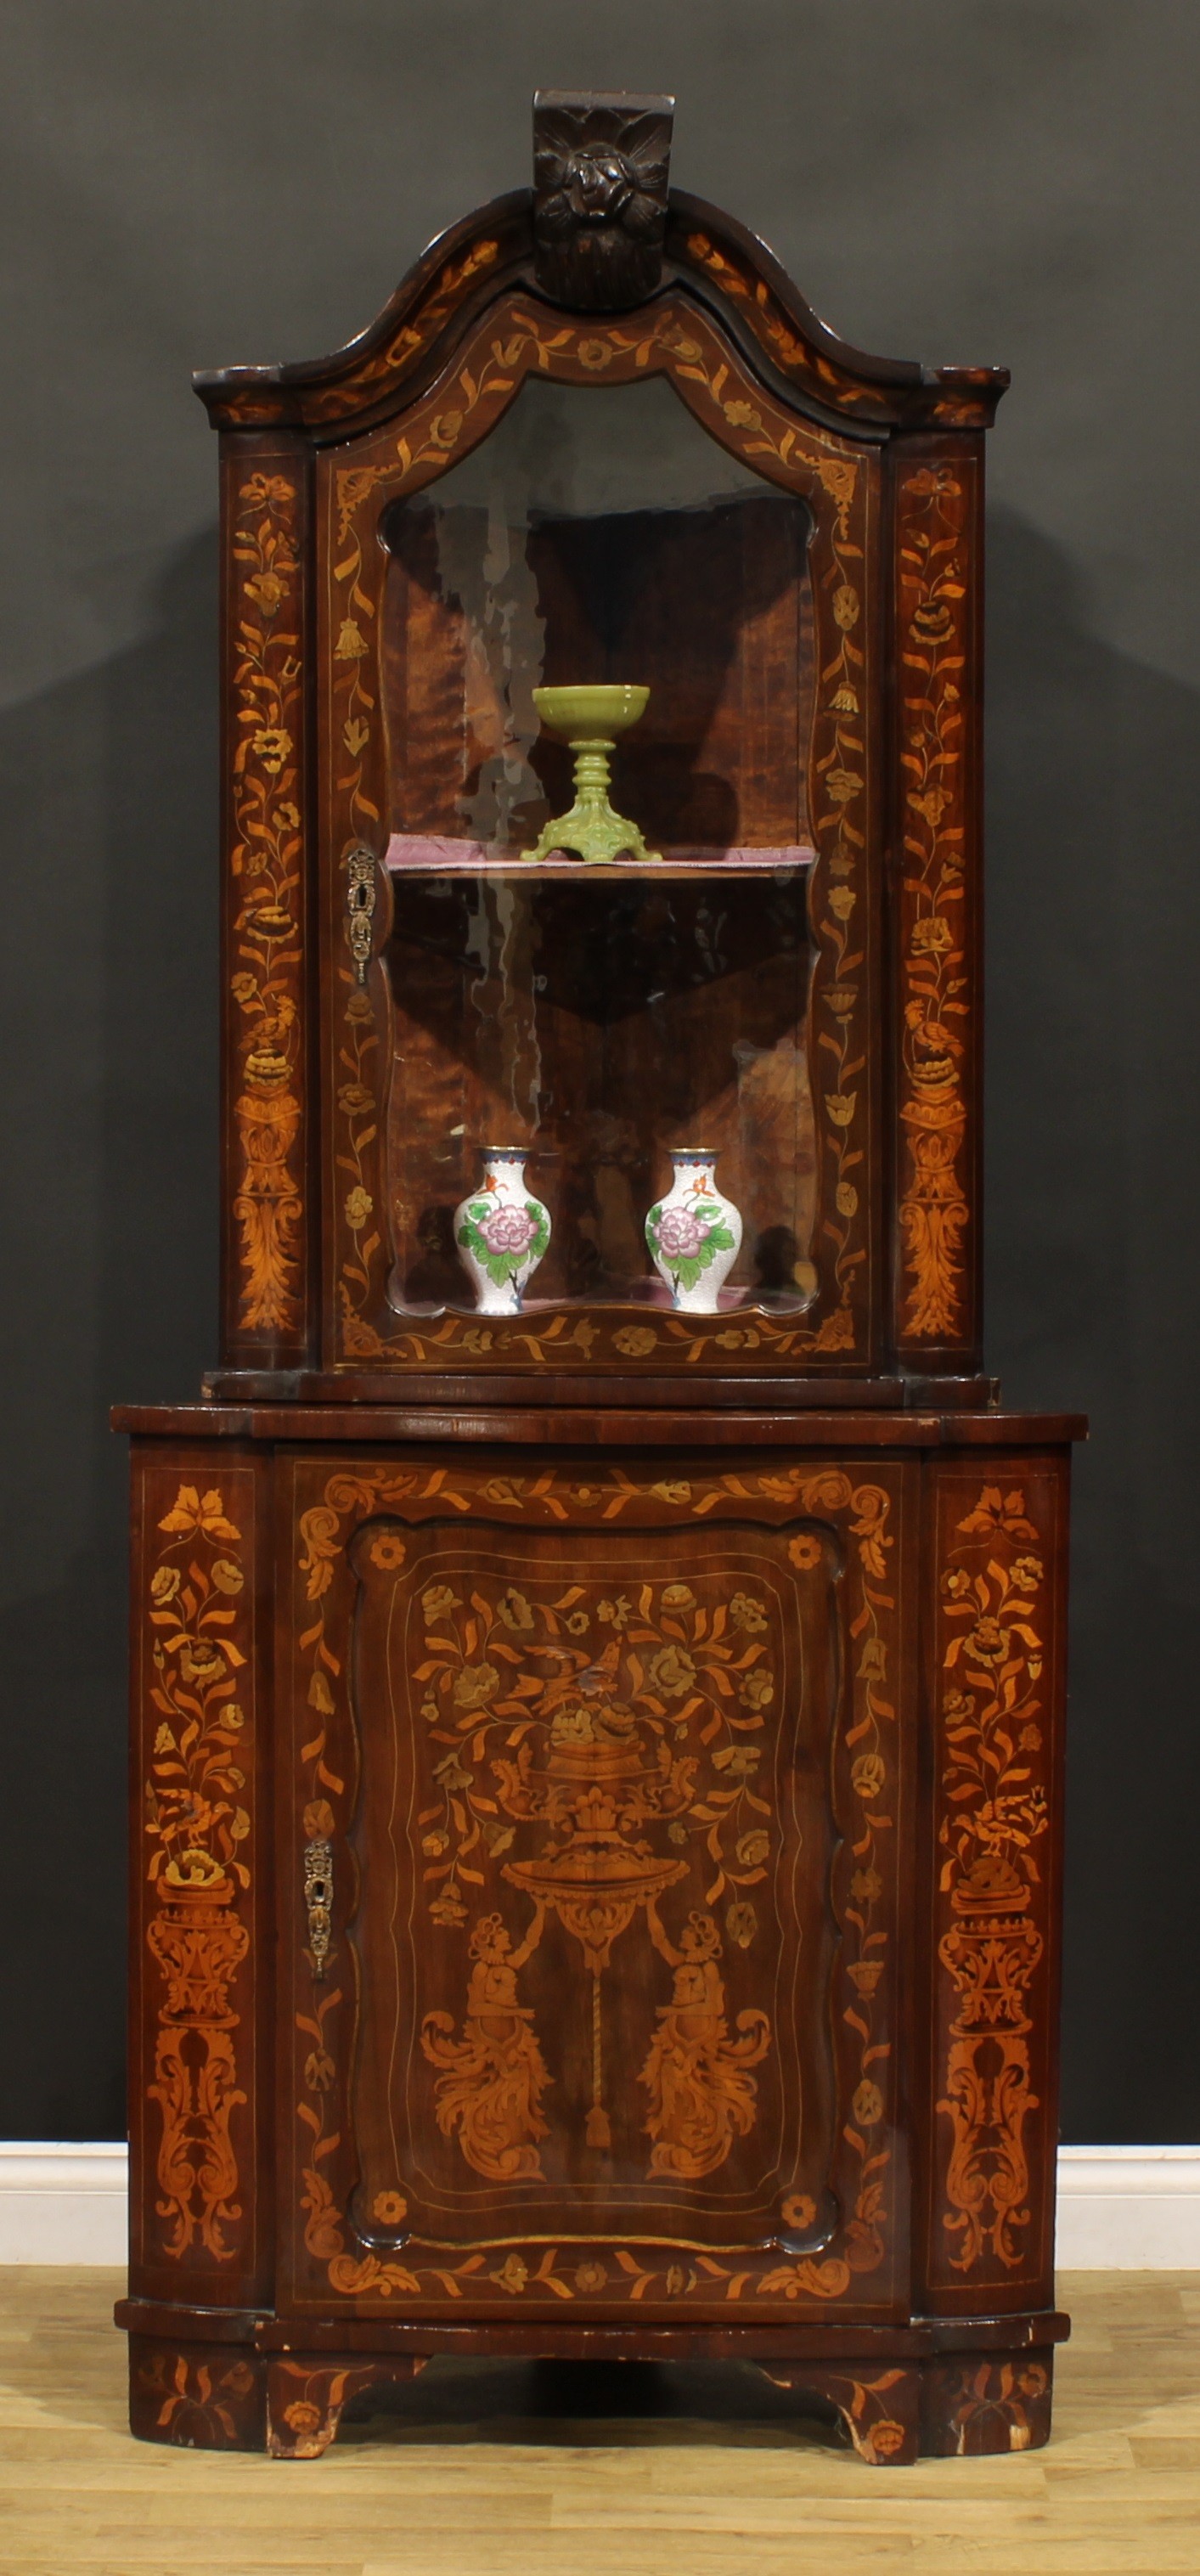 A 19th century Dutch marquetry floor standing corner display cabinet, arched cresting above a glazed